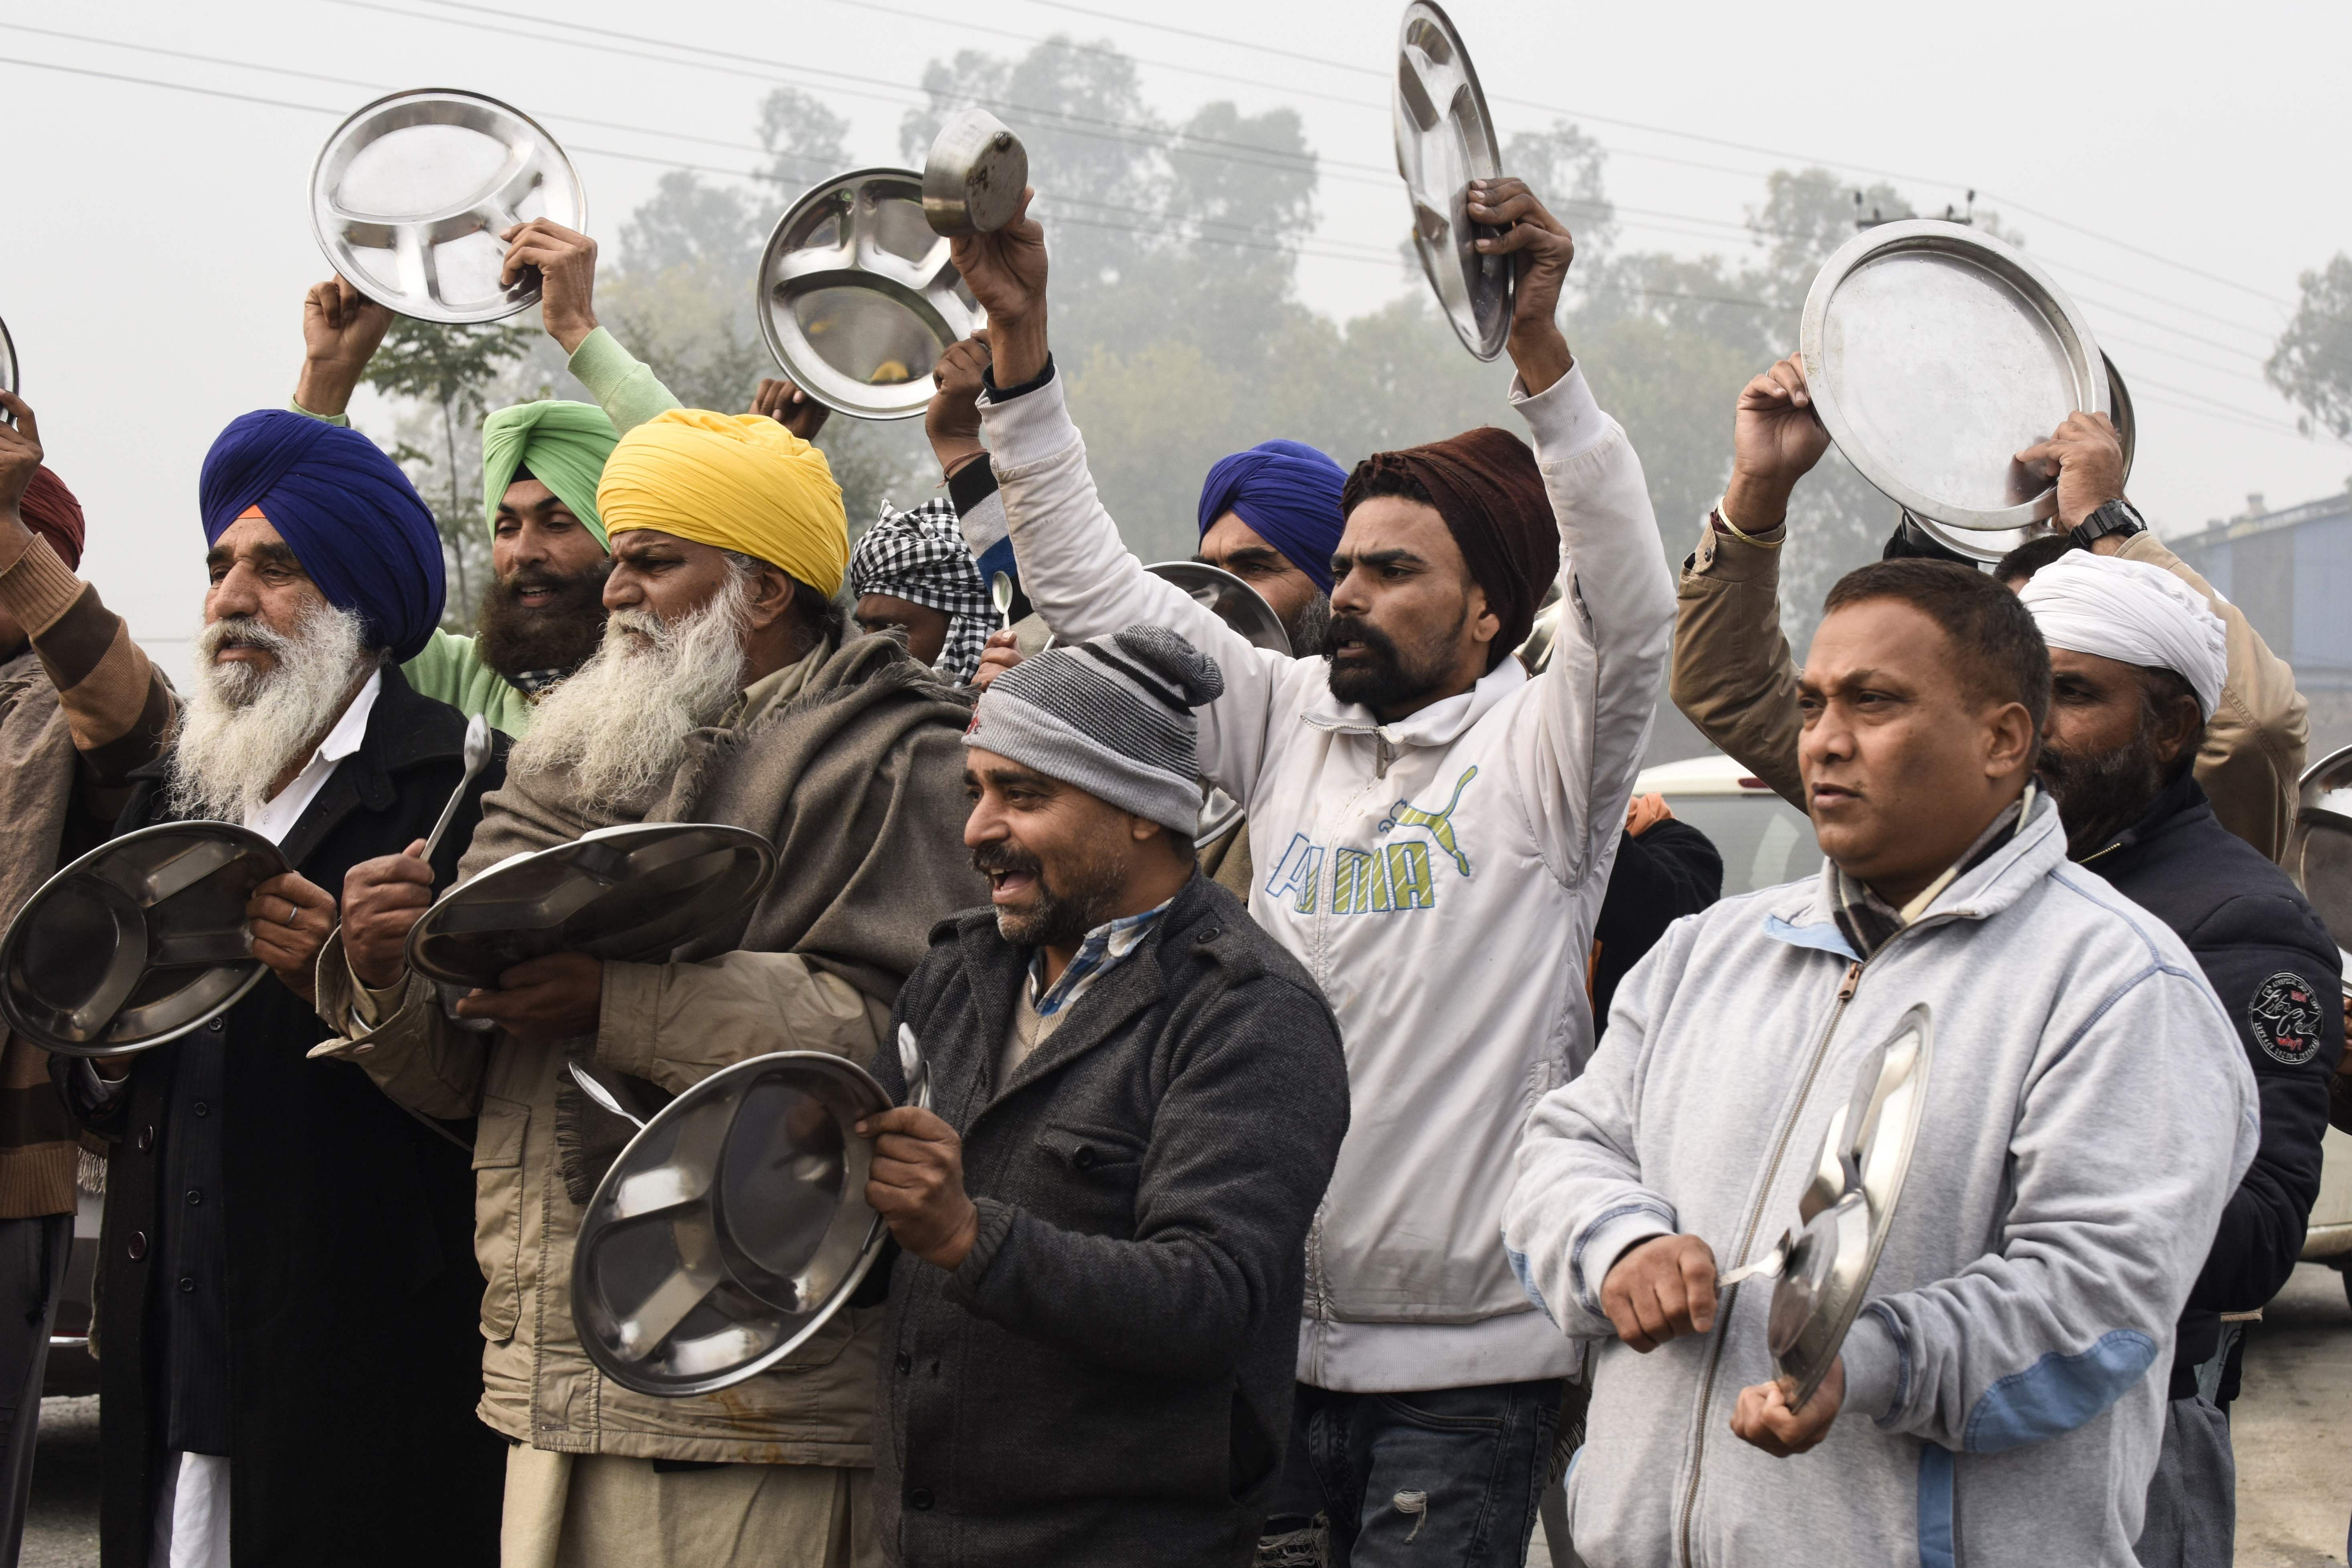 Farmers beat utensils during a protest against the central government's recent agricultural reforms as India's Prime Minister Narendra Modi addressed the nation on the monthly radio programme 'Mann Ki Baat', at the Toll Plaza, on the outskirts of Amritsar on December 27, 2020. Credit: AFP Photo